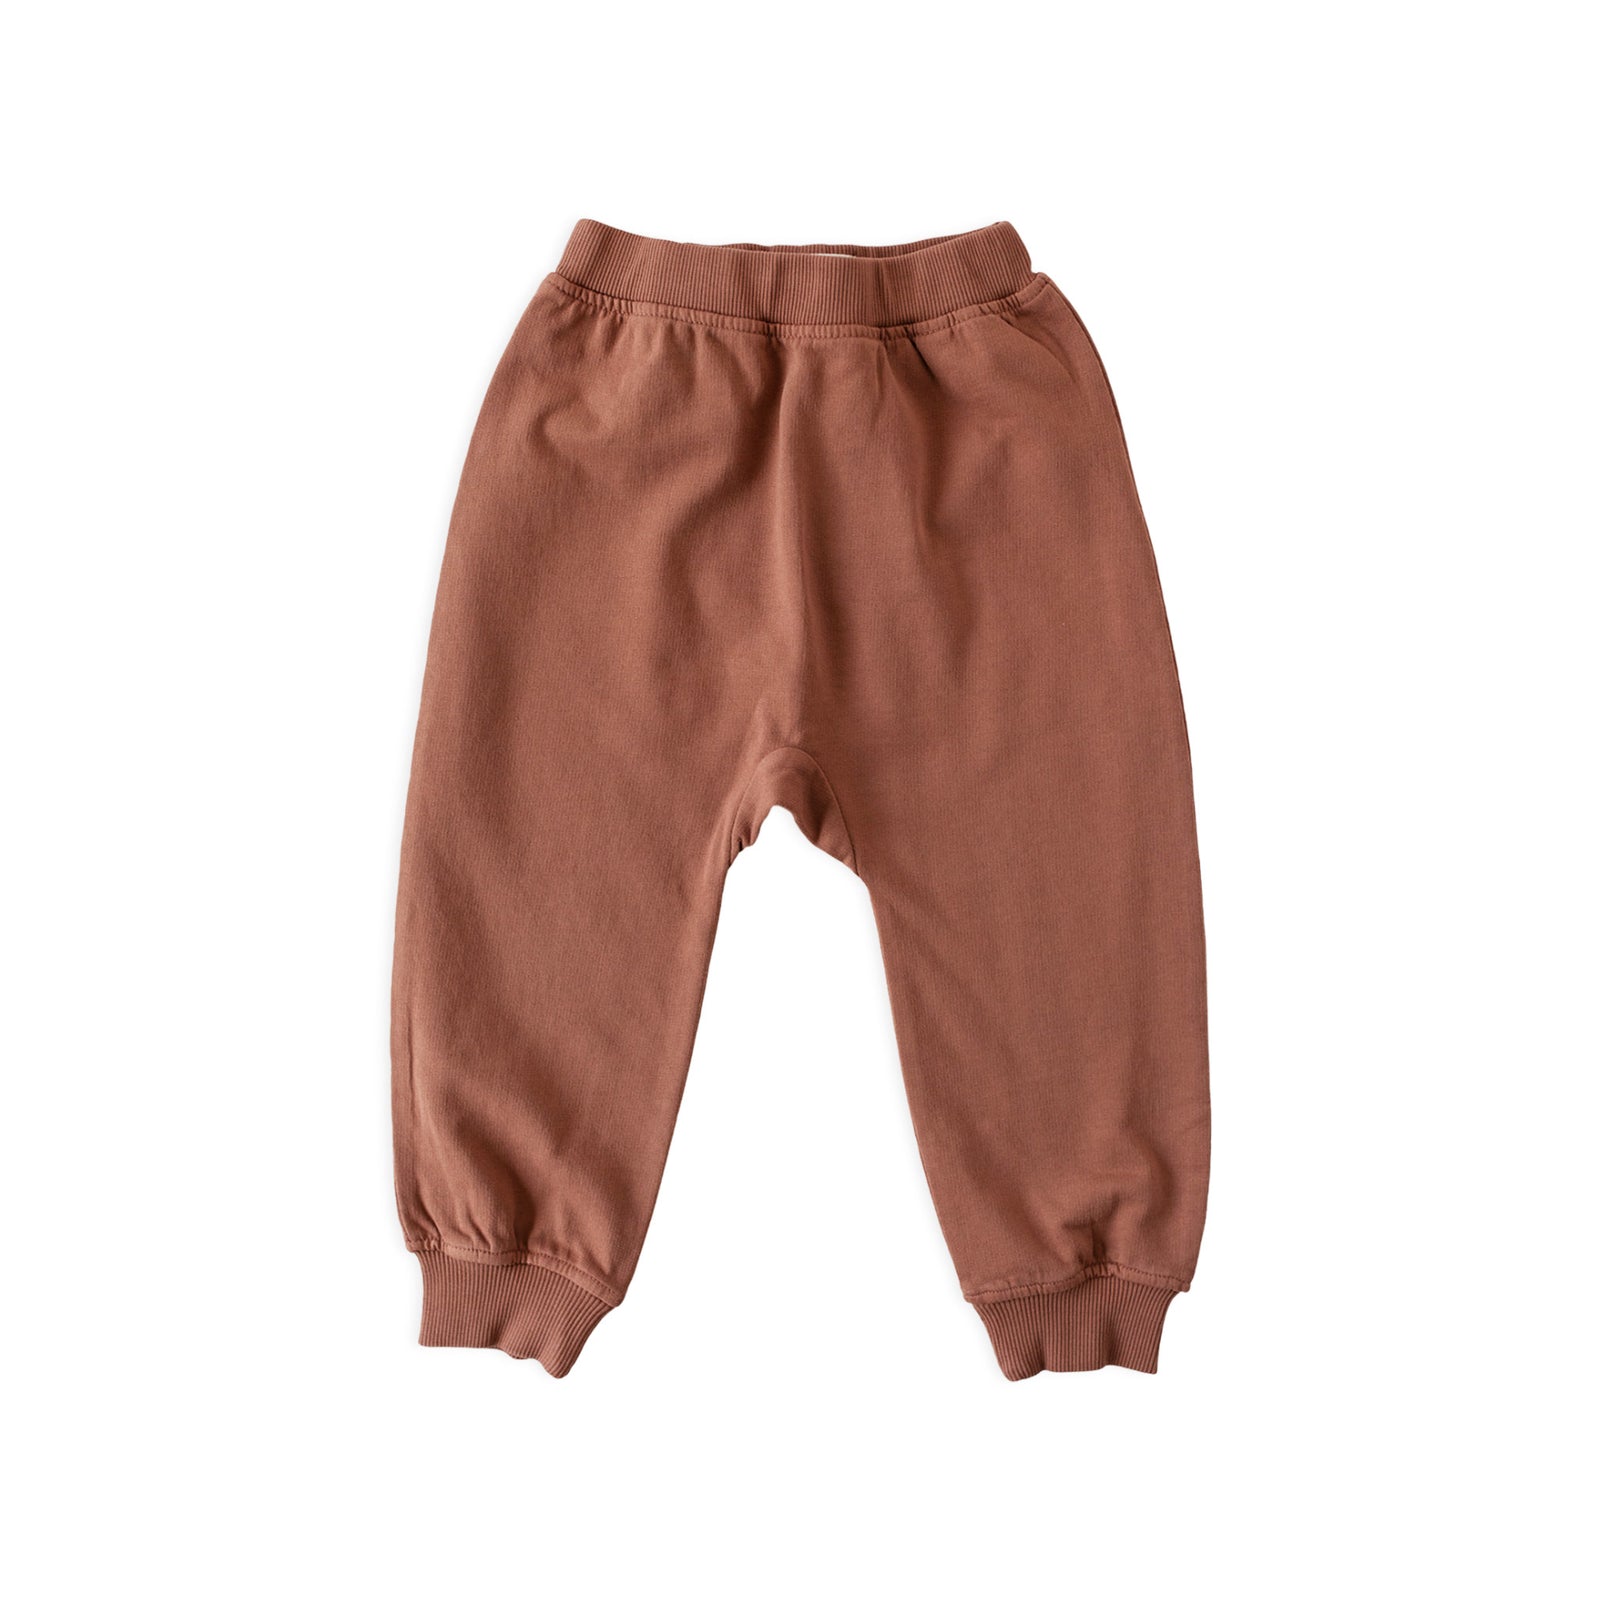 French Terry Harem Pant Pant Pehr Canada Clay 18 - 24 mos. 